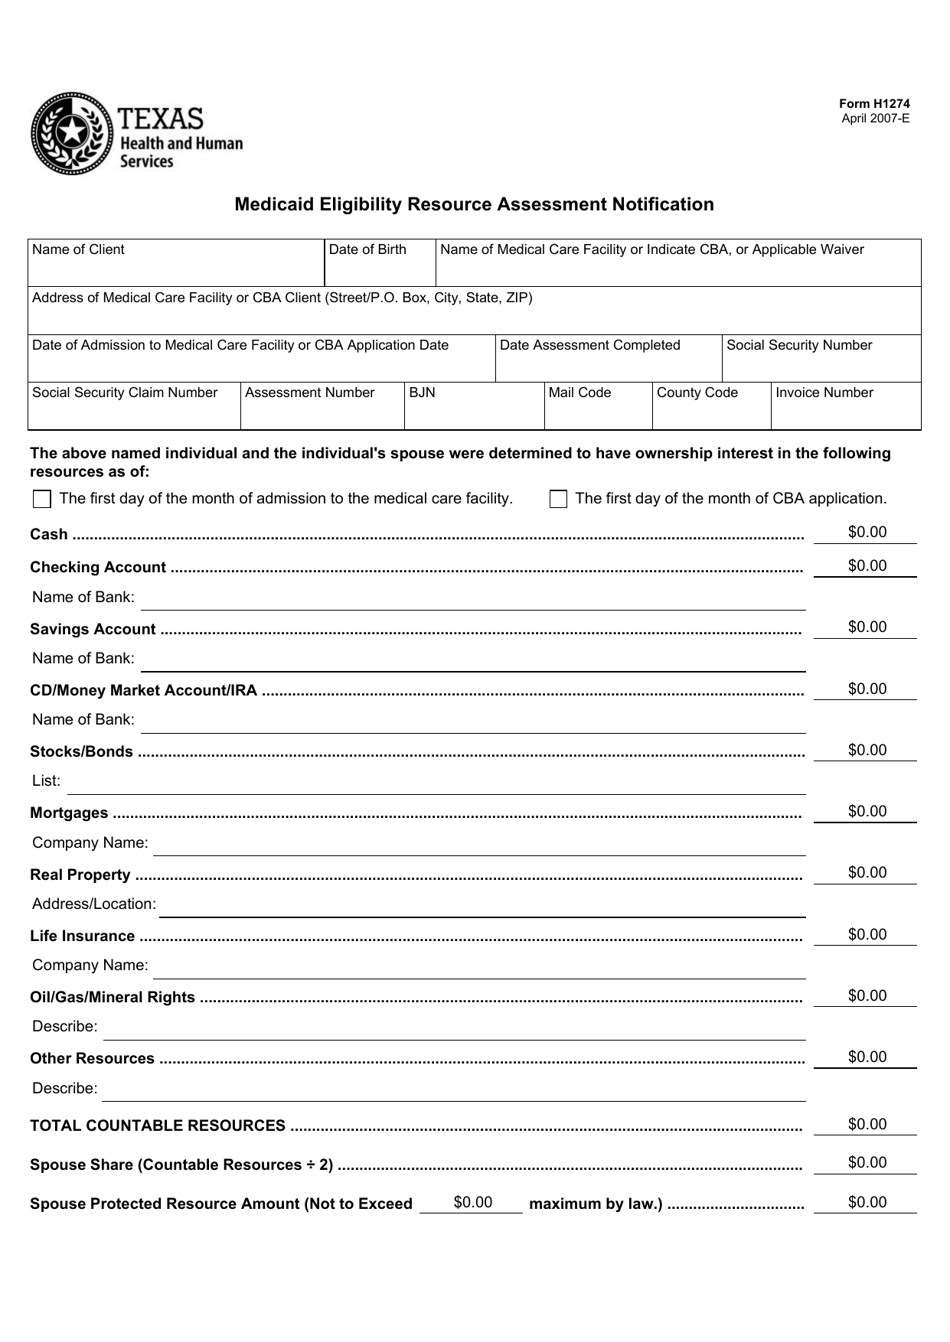 form-h1274-download-fillable-pdf-or-fill-online-medicaid-eligibility